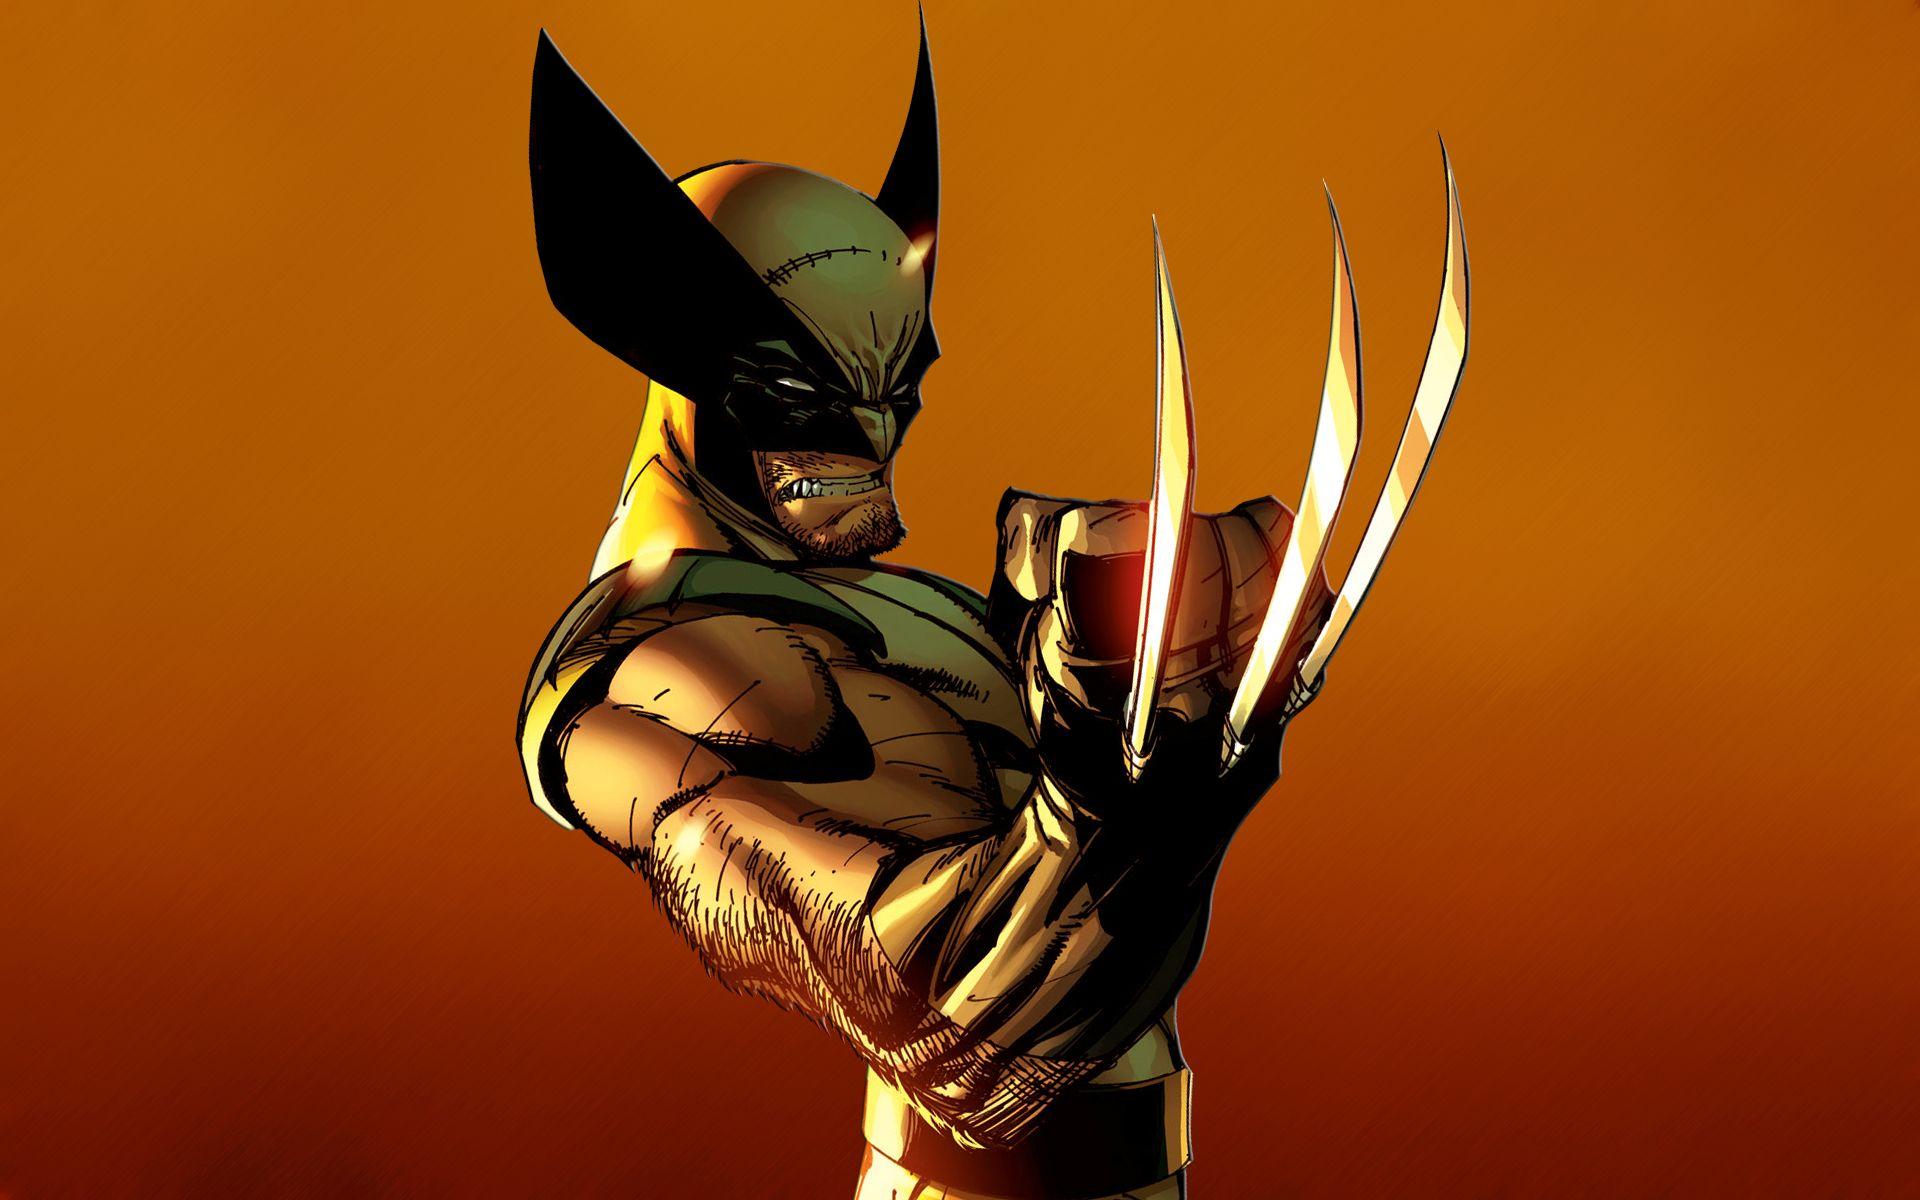 Best Wolverine Wallpaper HD Image Full Picture For Smartphone